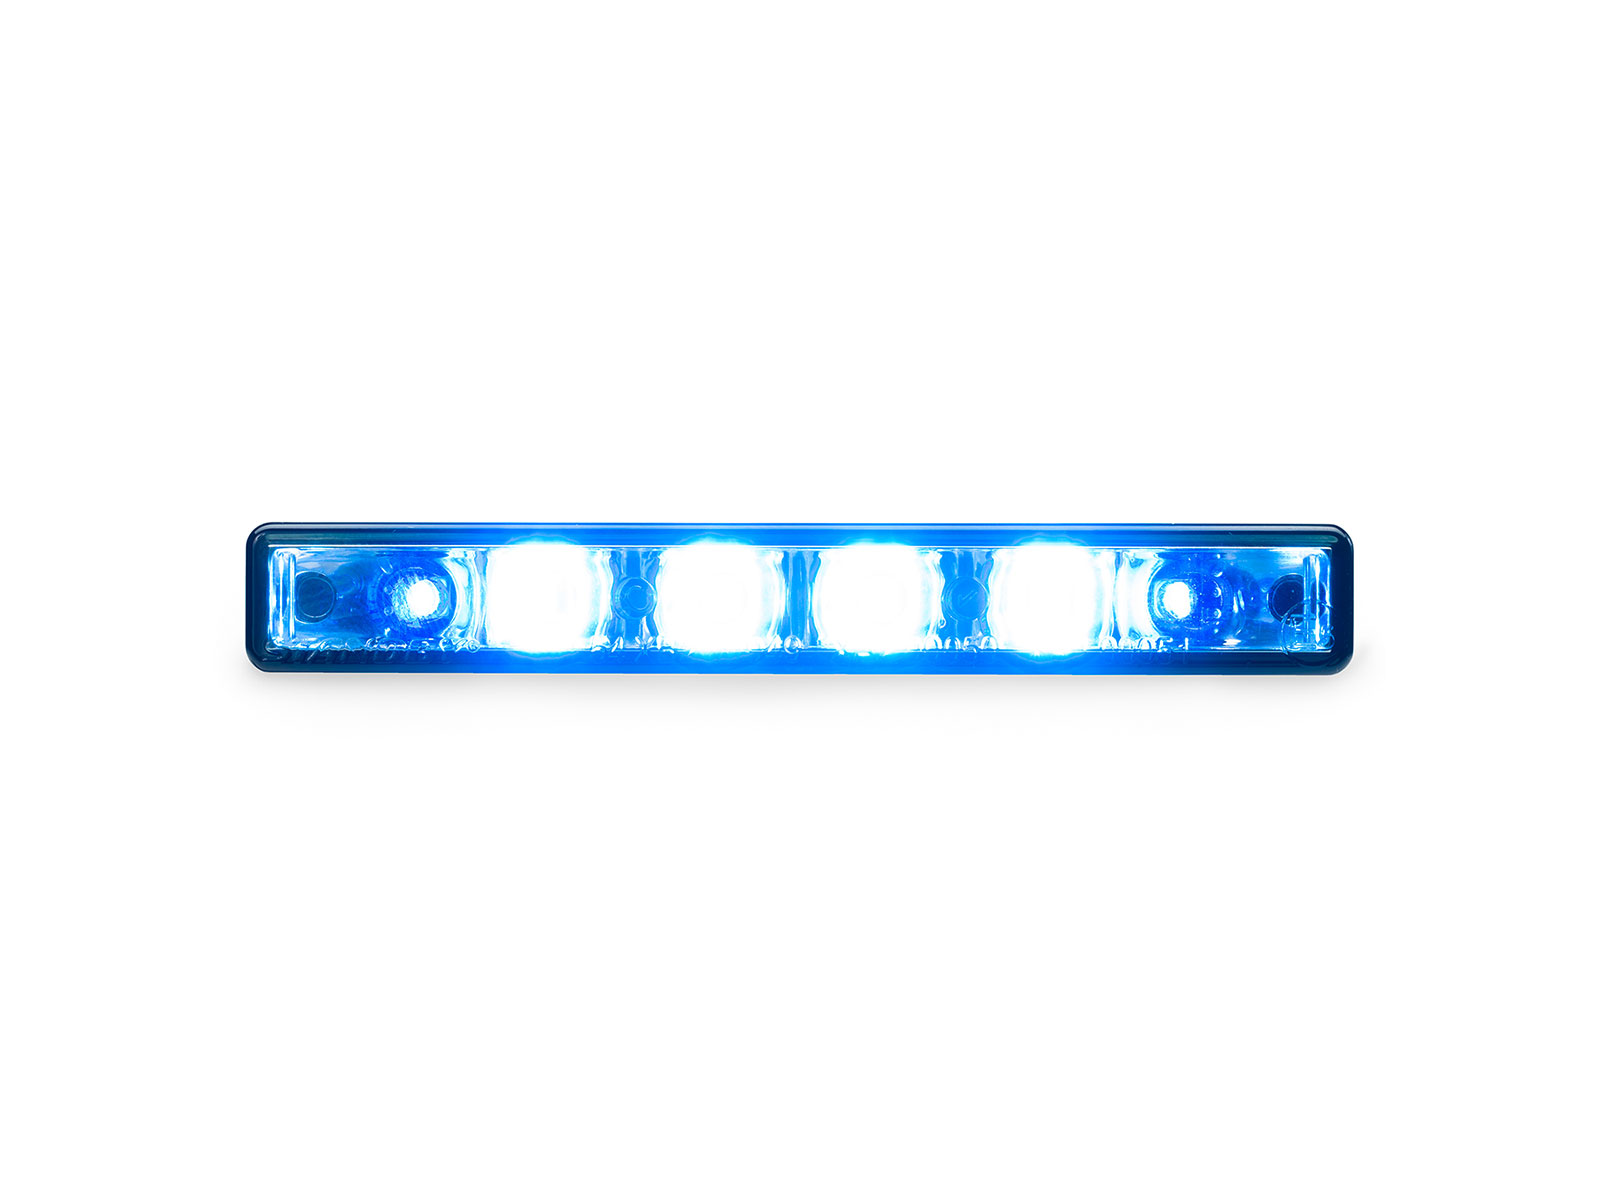 LED-Frontblitzer Standby L54